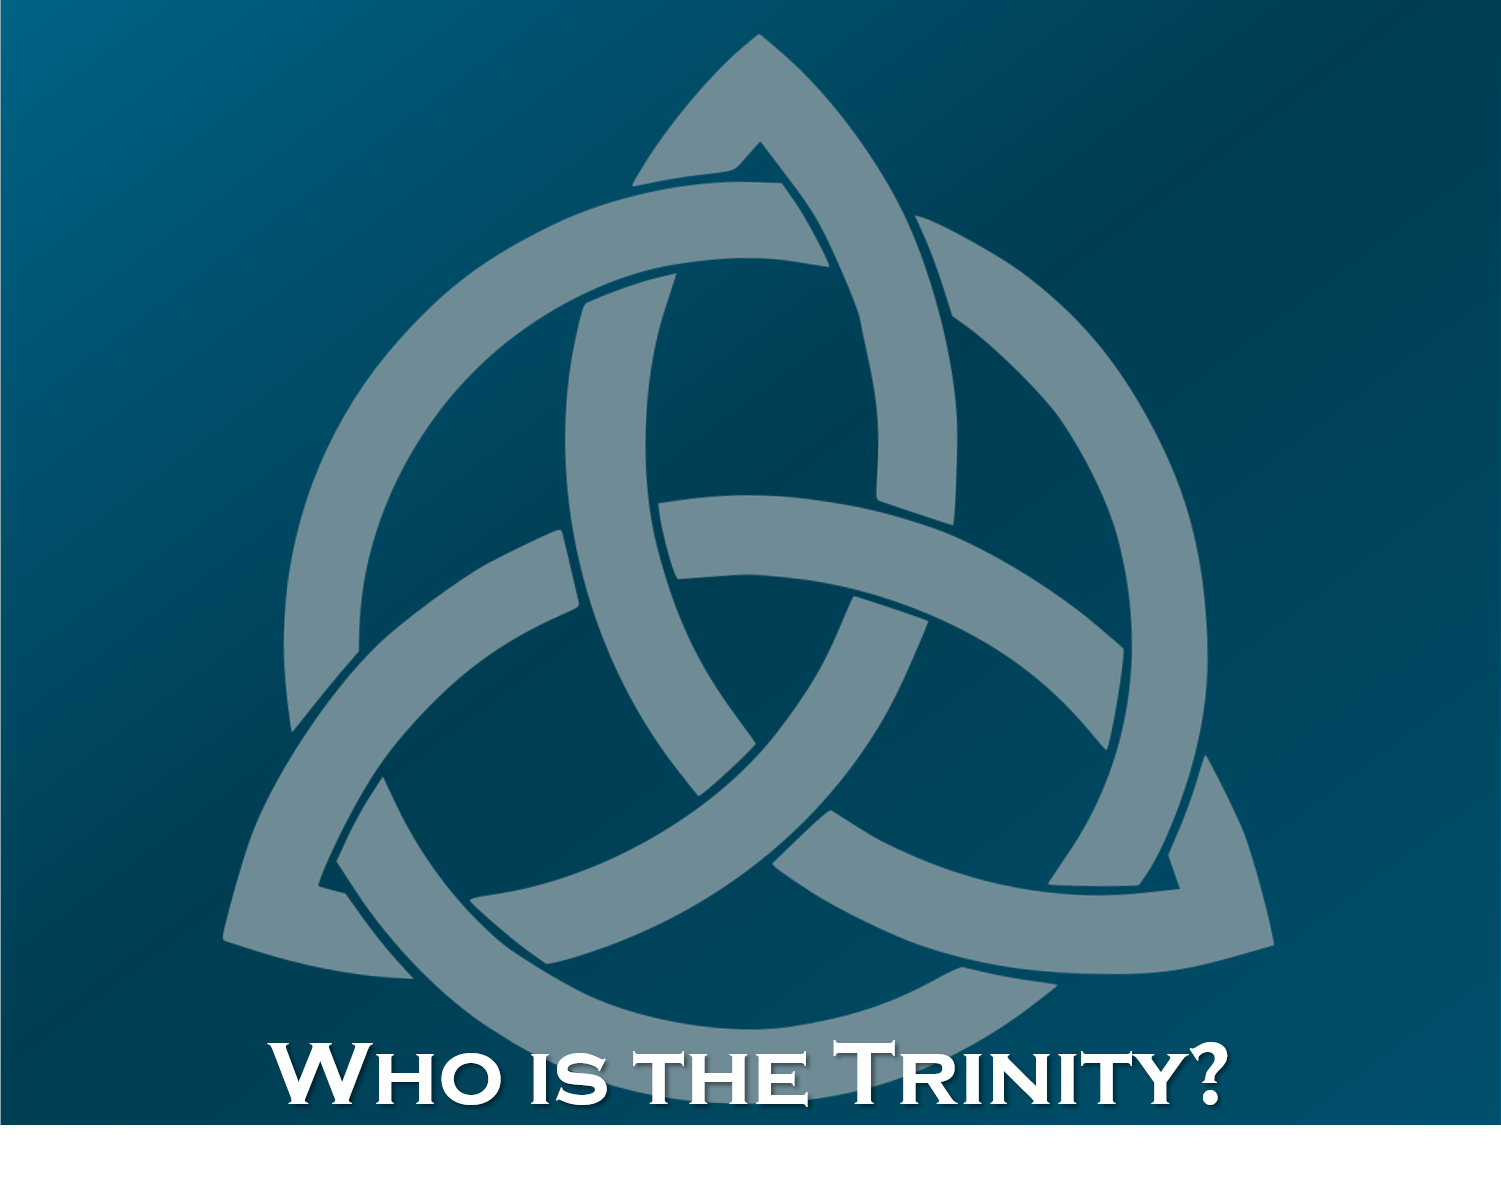 “WHO IS THE TRINITY? – INTIMACY”